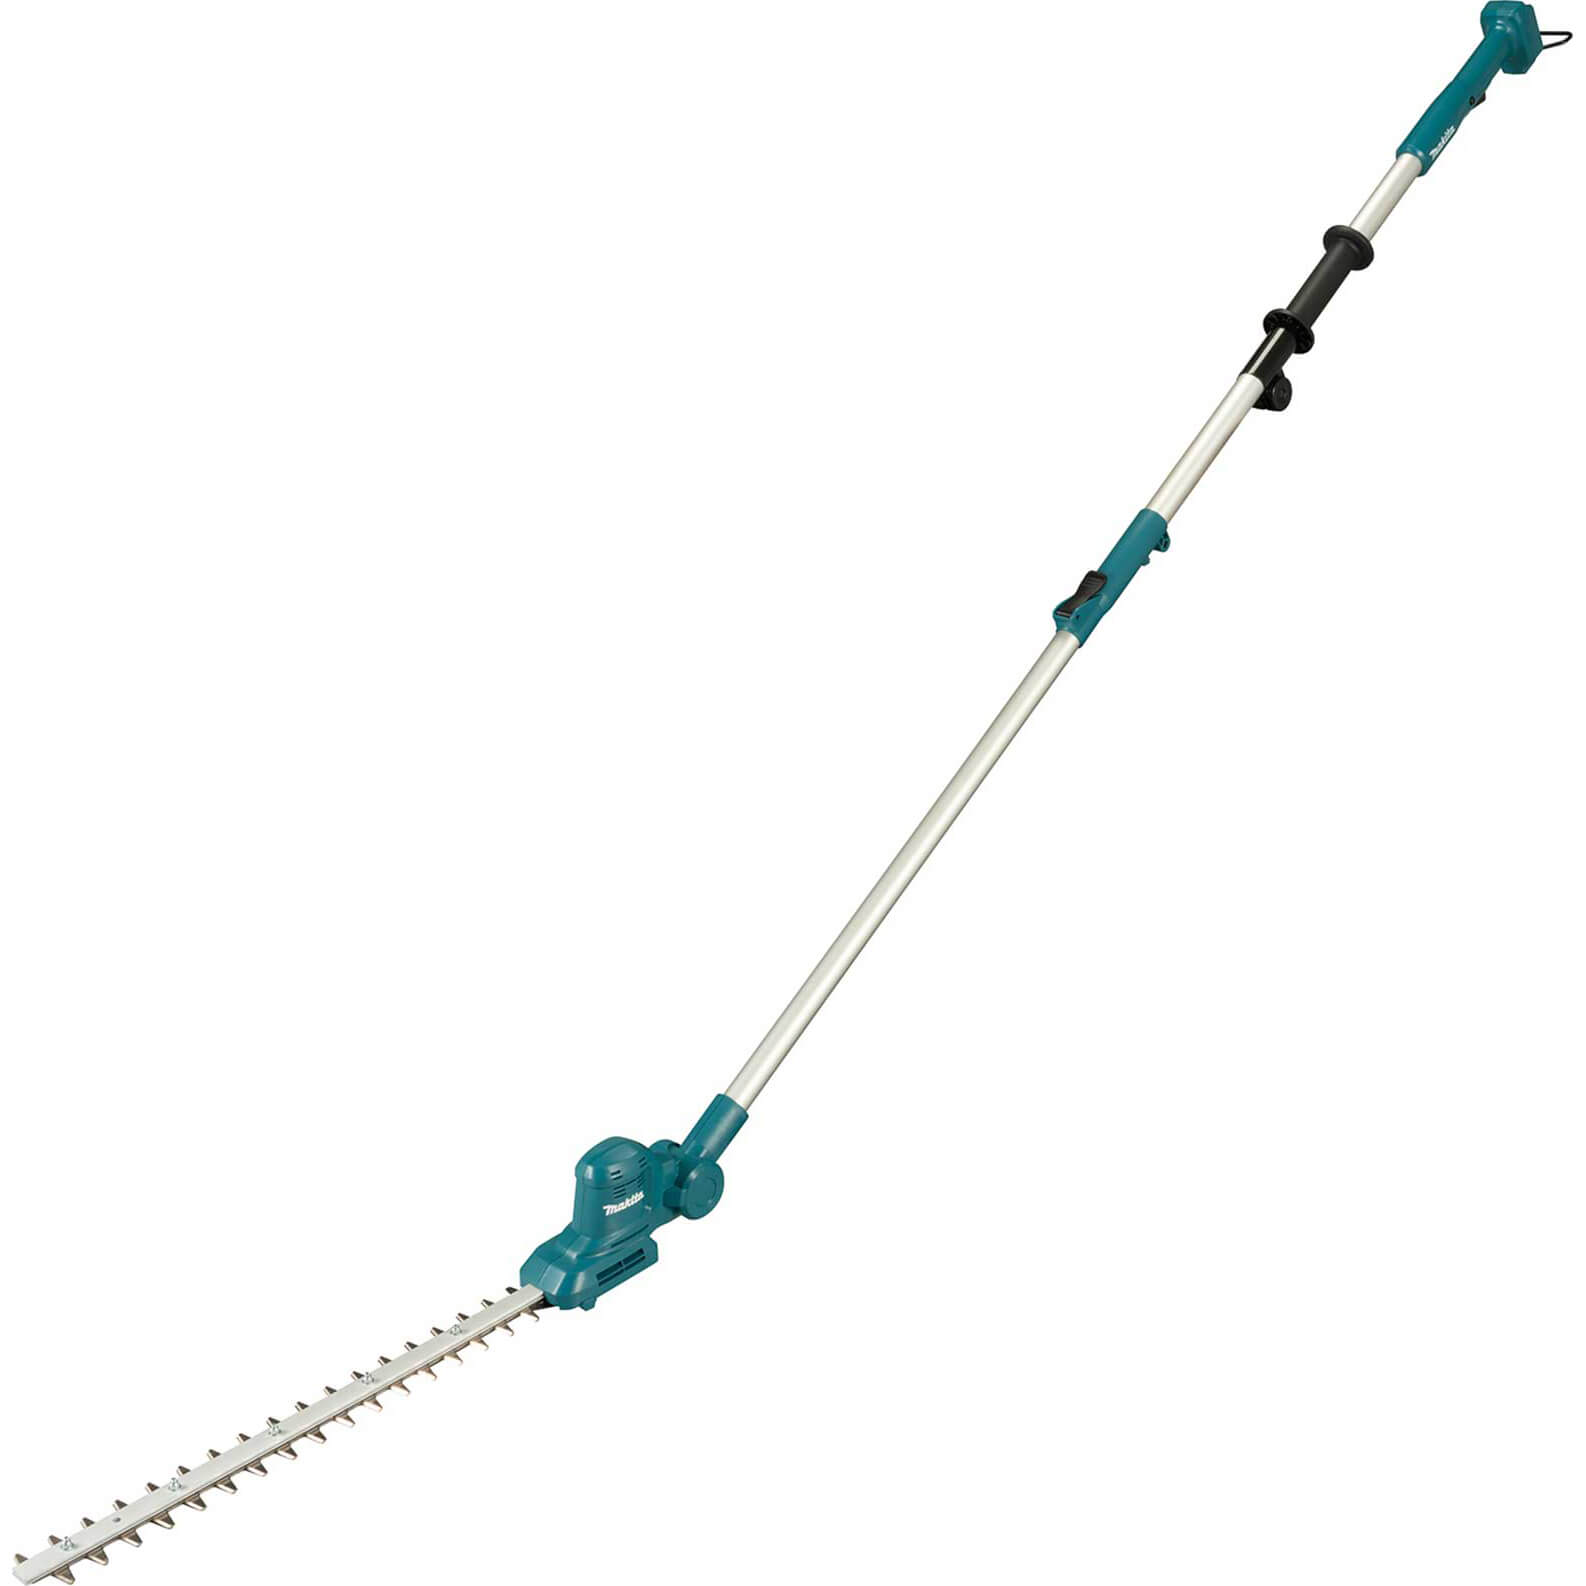 Photo of Makita Un460wd 12v Max Cxt Cordless Pole Hedge Trimmer 460mm No Batteries No Charger